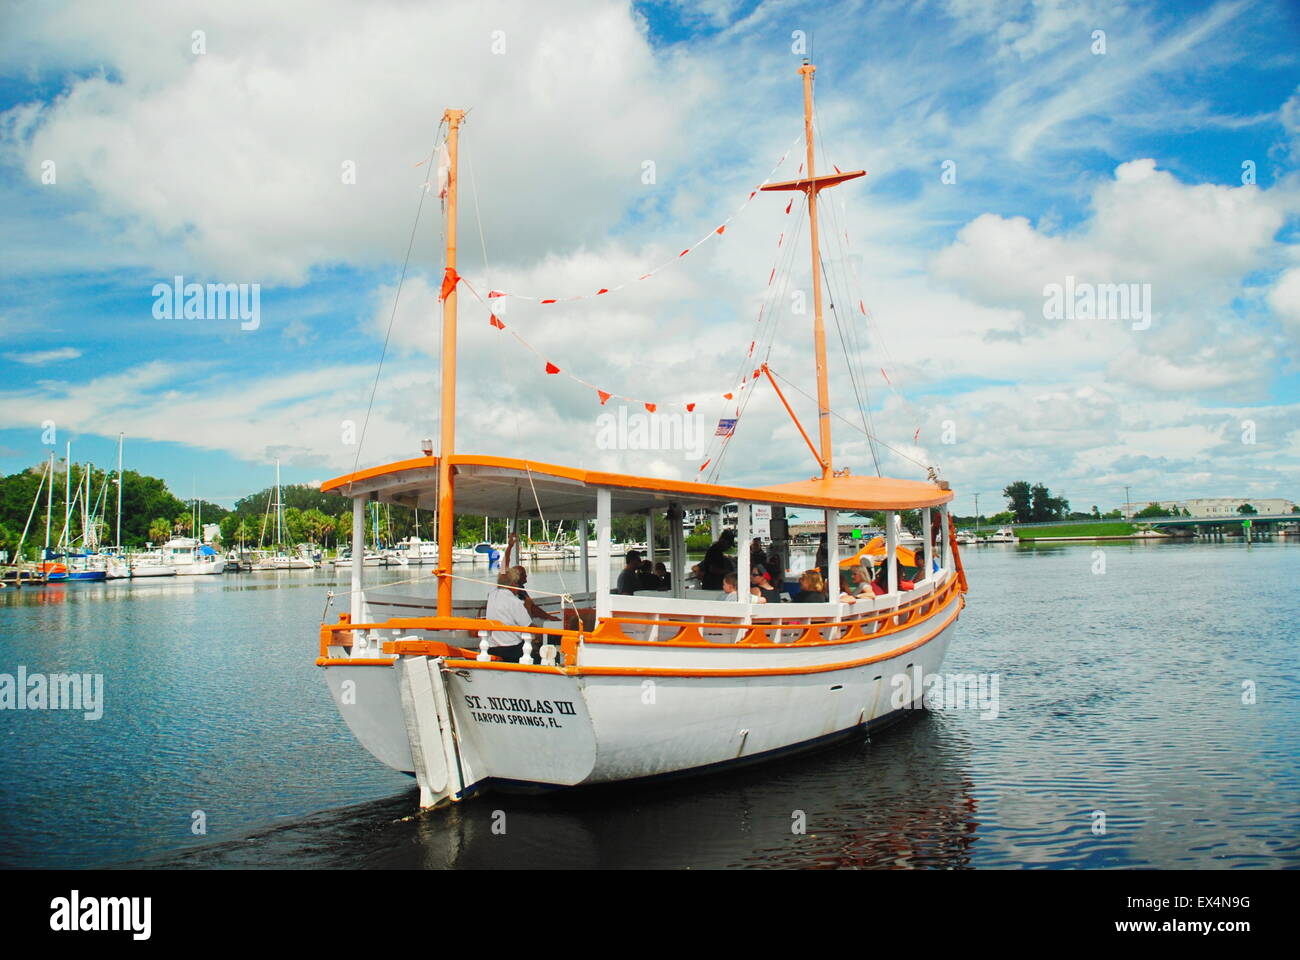 Sponge diver boat takes tourists out in Tarpon Springs, Florida. Stock Photo